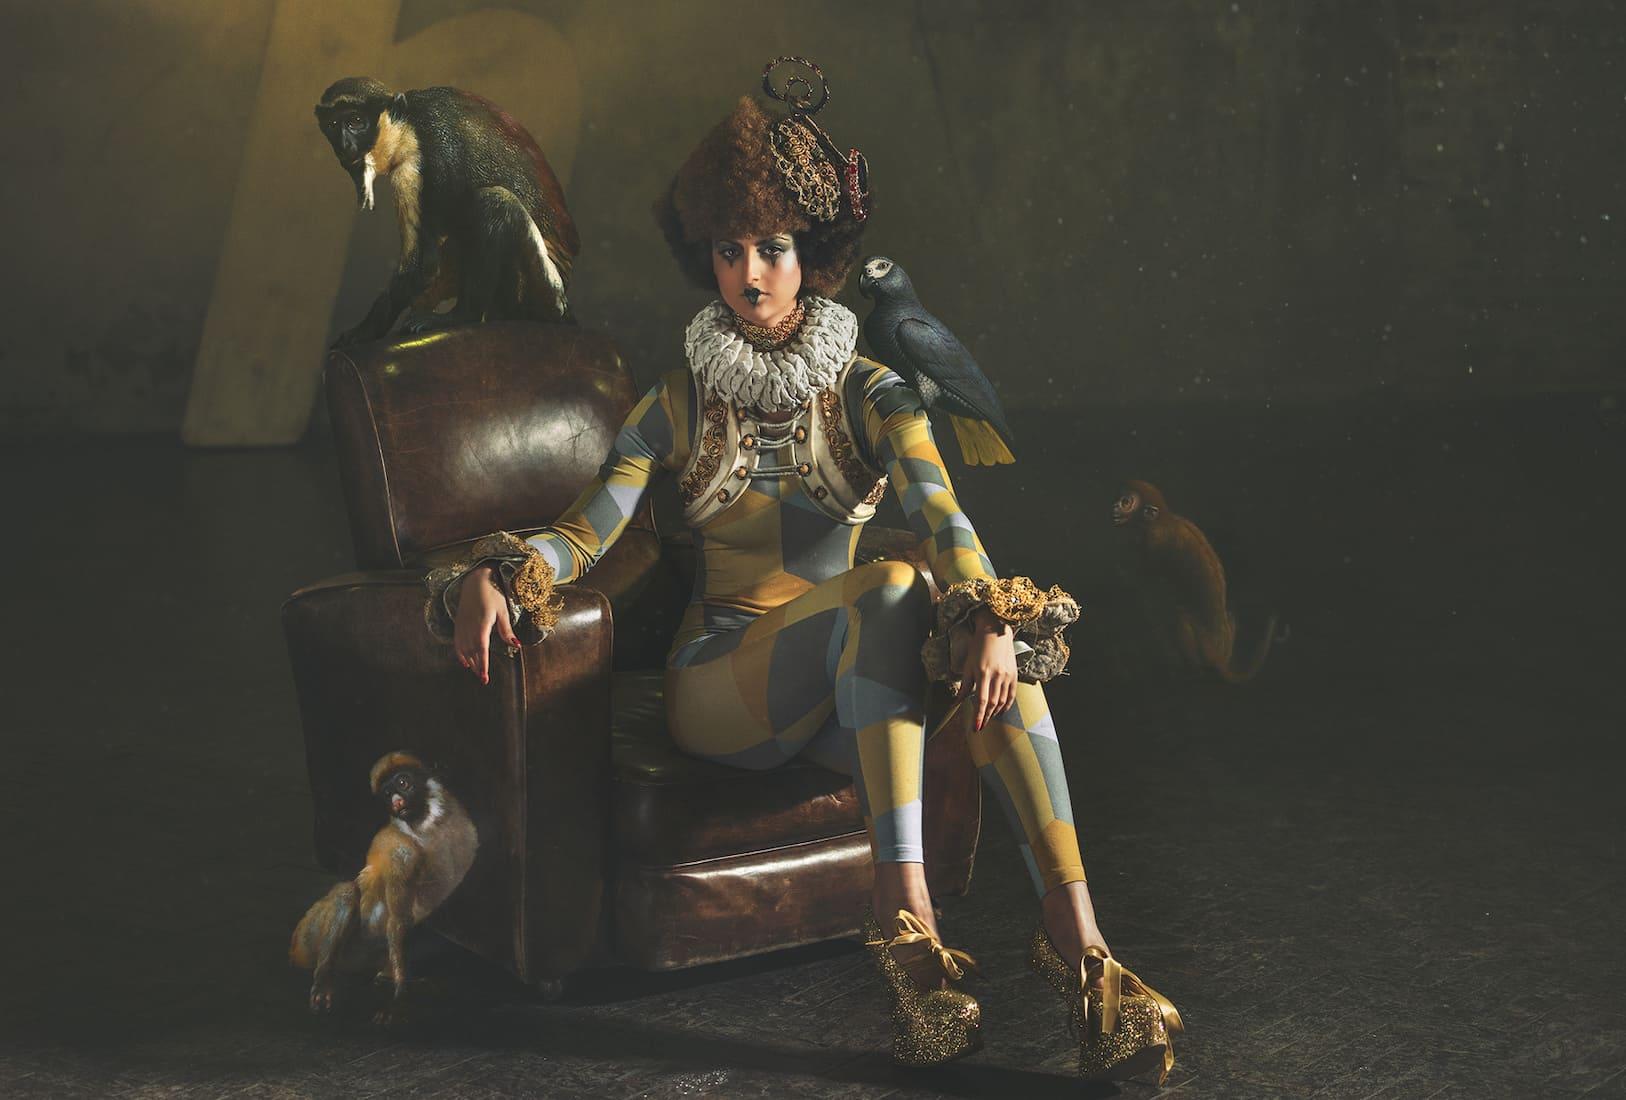 Miss Aniela Color Photograph - Circus Circus (Surreal Fashion) - photography, woman with monkeys